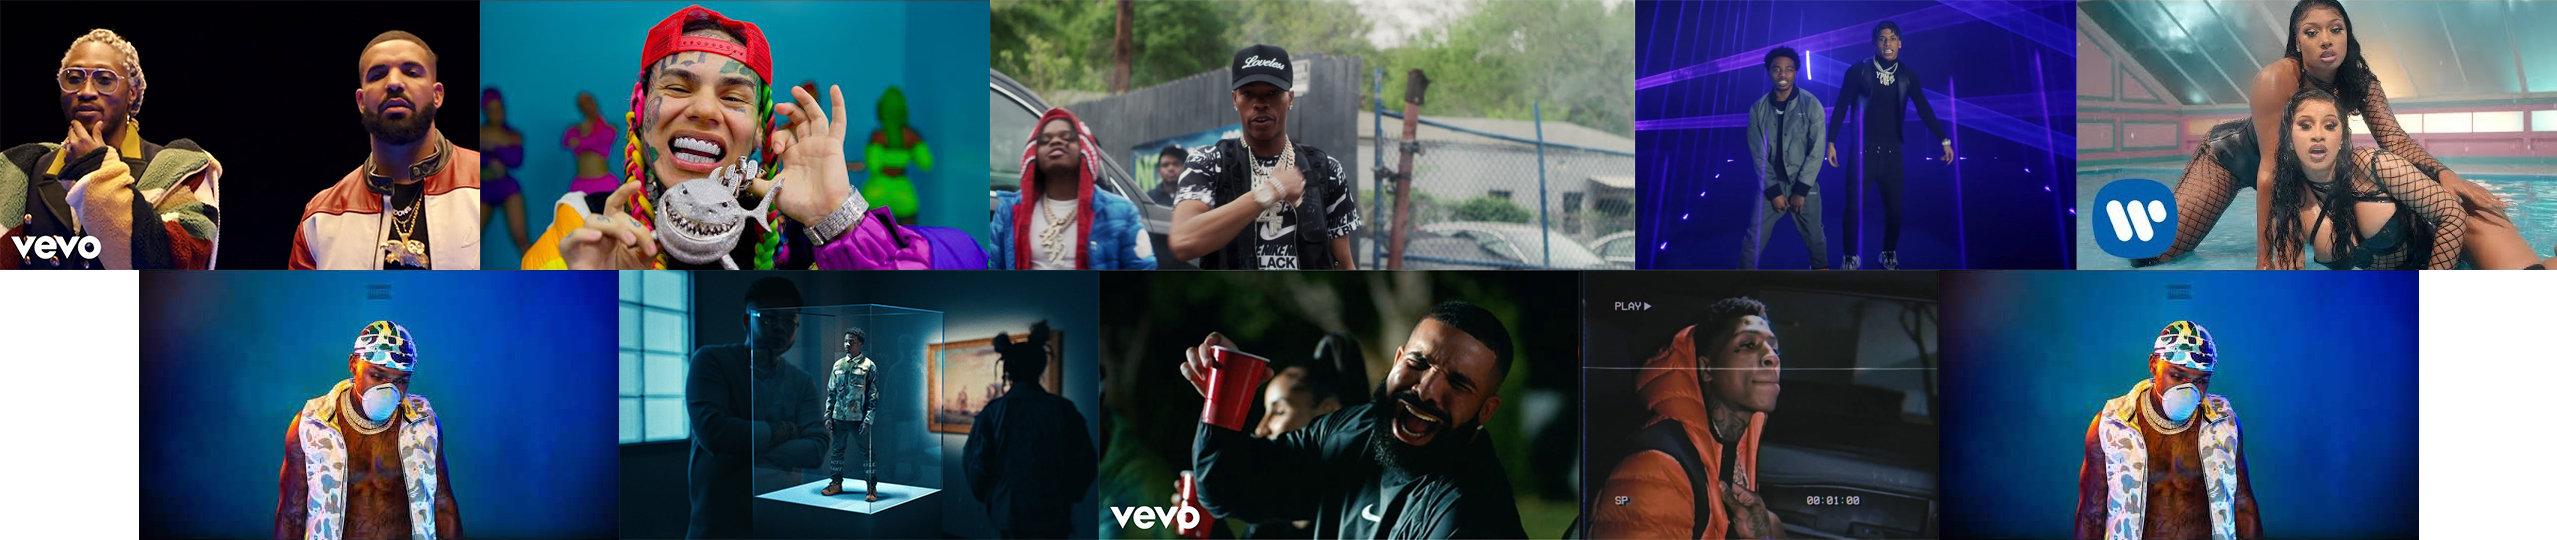 YouTube’s 2020 Top Music Videos in the U.S.